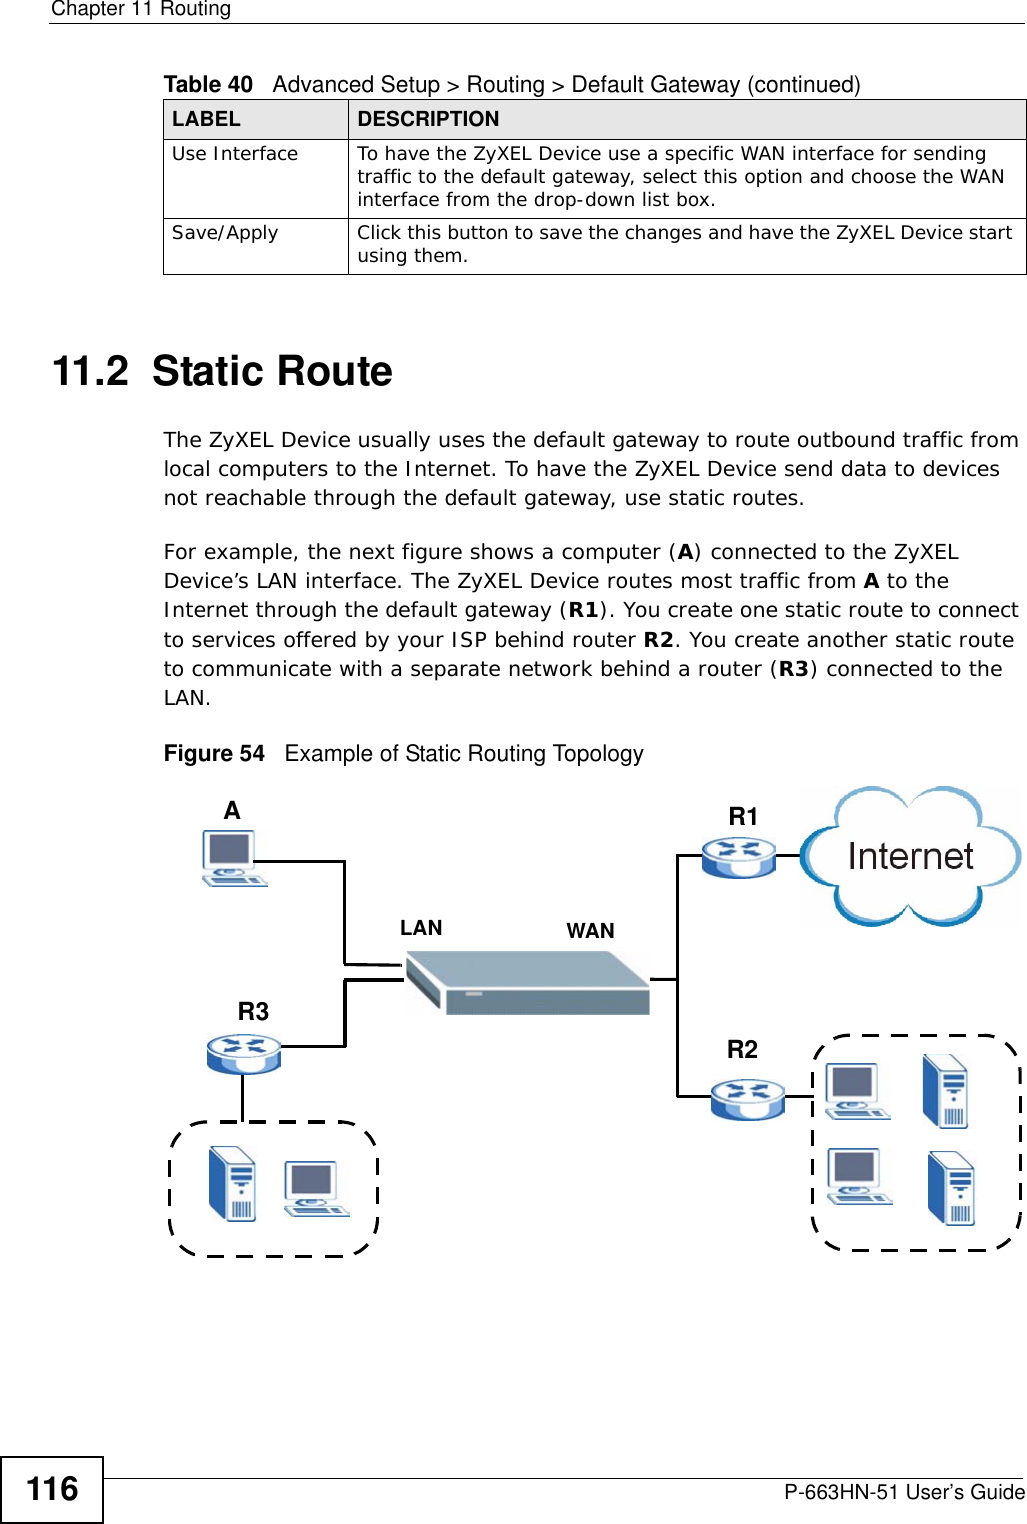 Chapter 11 RoutingP-663HN-51 User’s Guide11611.2  Static Route   The ZyXEL Device usually uses the default gateway to route outbound traffic from local computers to the Internet. To have the ZyXEL Device send data to devices not reachable through the default gateway, use static routes.For example, the next figure shows a computer (A) connected to the ZyXEL Device’s LAN interface. The ZyXEL Device routes most traffic from A to the Internet through the default gateway (R1). You create one static route to connect to services offered by your ISP behind router R2. You create another static route to communicate with a separate network behind a router (R3) connected to the LAN.   Figure 54   Example of Static Routing TopologyUse Interface To have the ZyXEL Device use a specific WAN interface for sending traffic to the default gateway, select this option and choose the WAN interface from the drop-down list box.Save/Apply Click this button to save the changes and have the ZyXEL Device start using them.Table 40   Advanced Setup &gt; Routing &gt; Default Gateway (continued)LABEL DESCRIPTIONWANR1R2AR3LAN